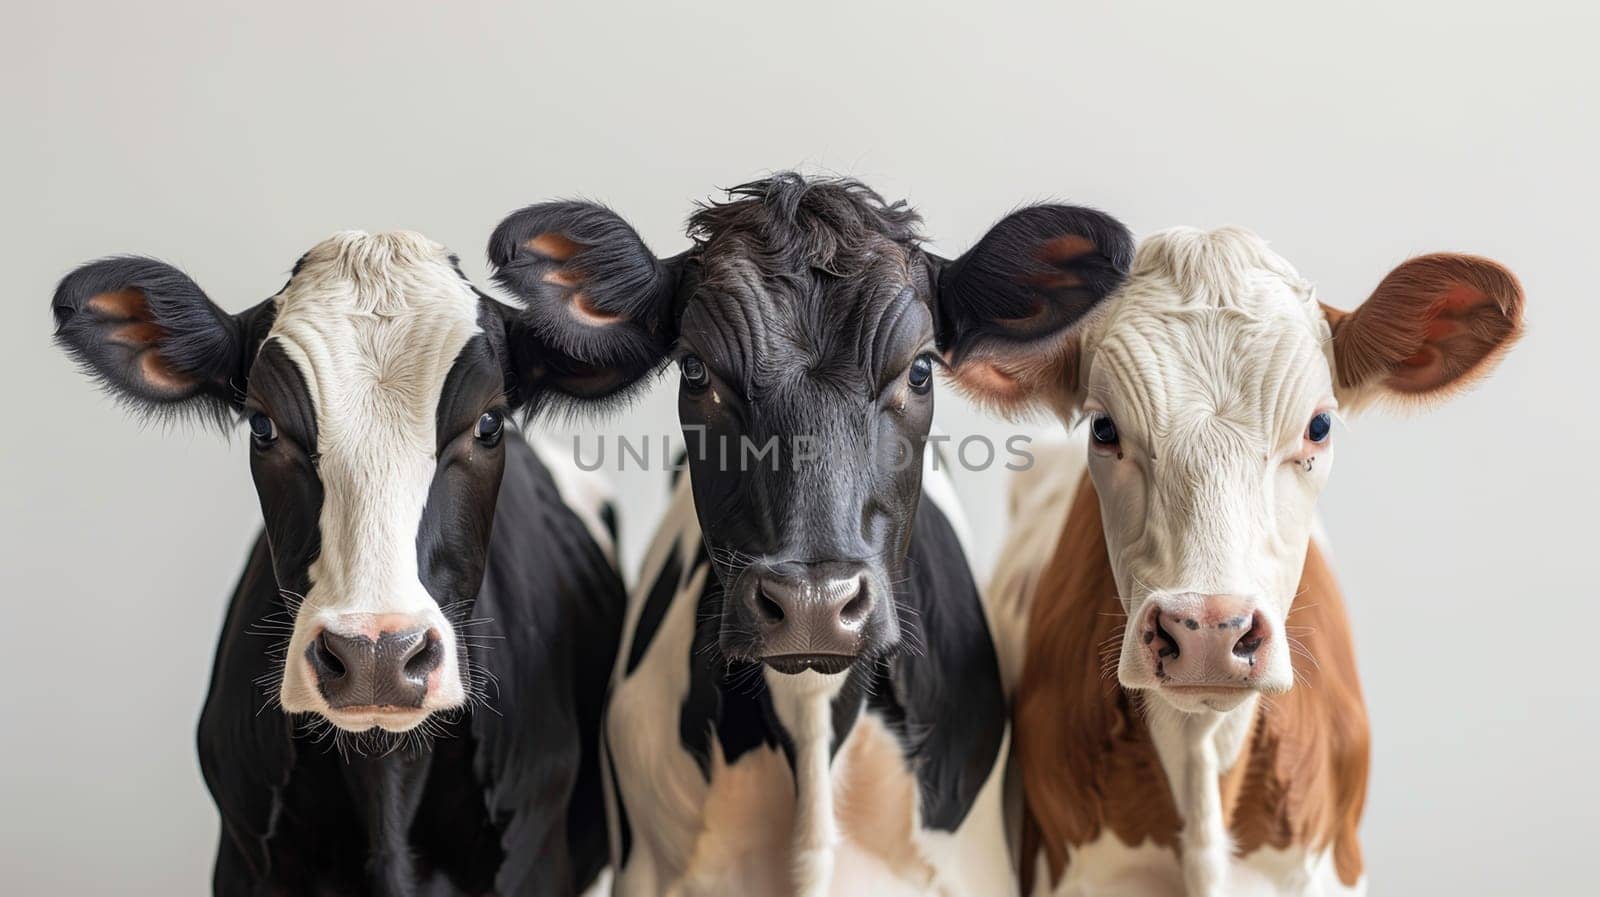 Three cows on a white background.